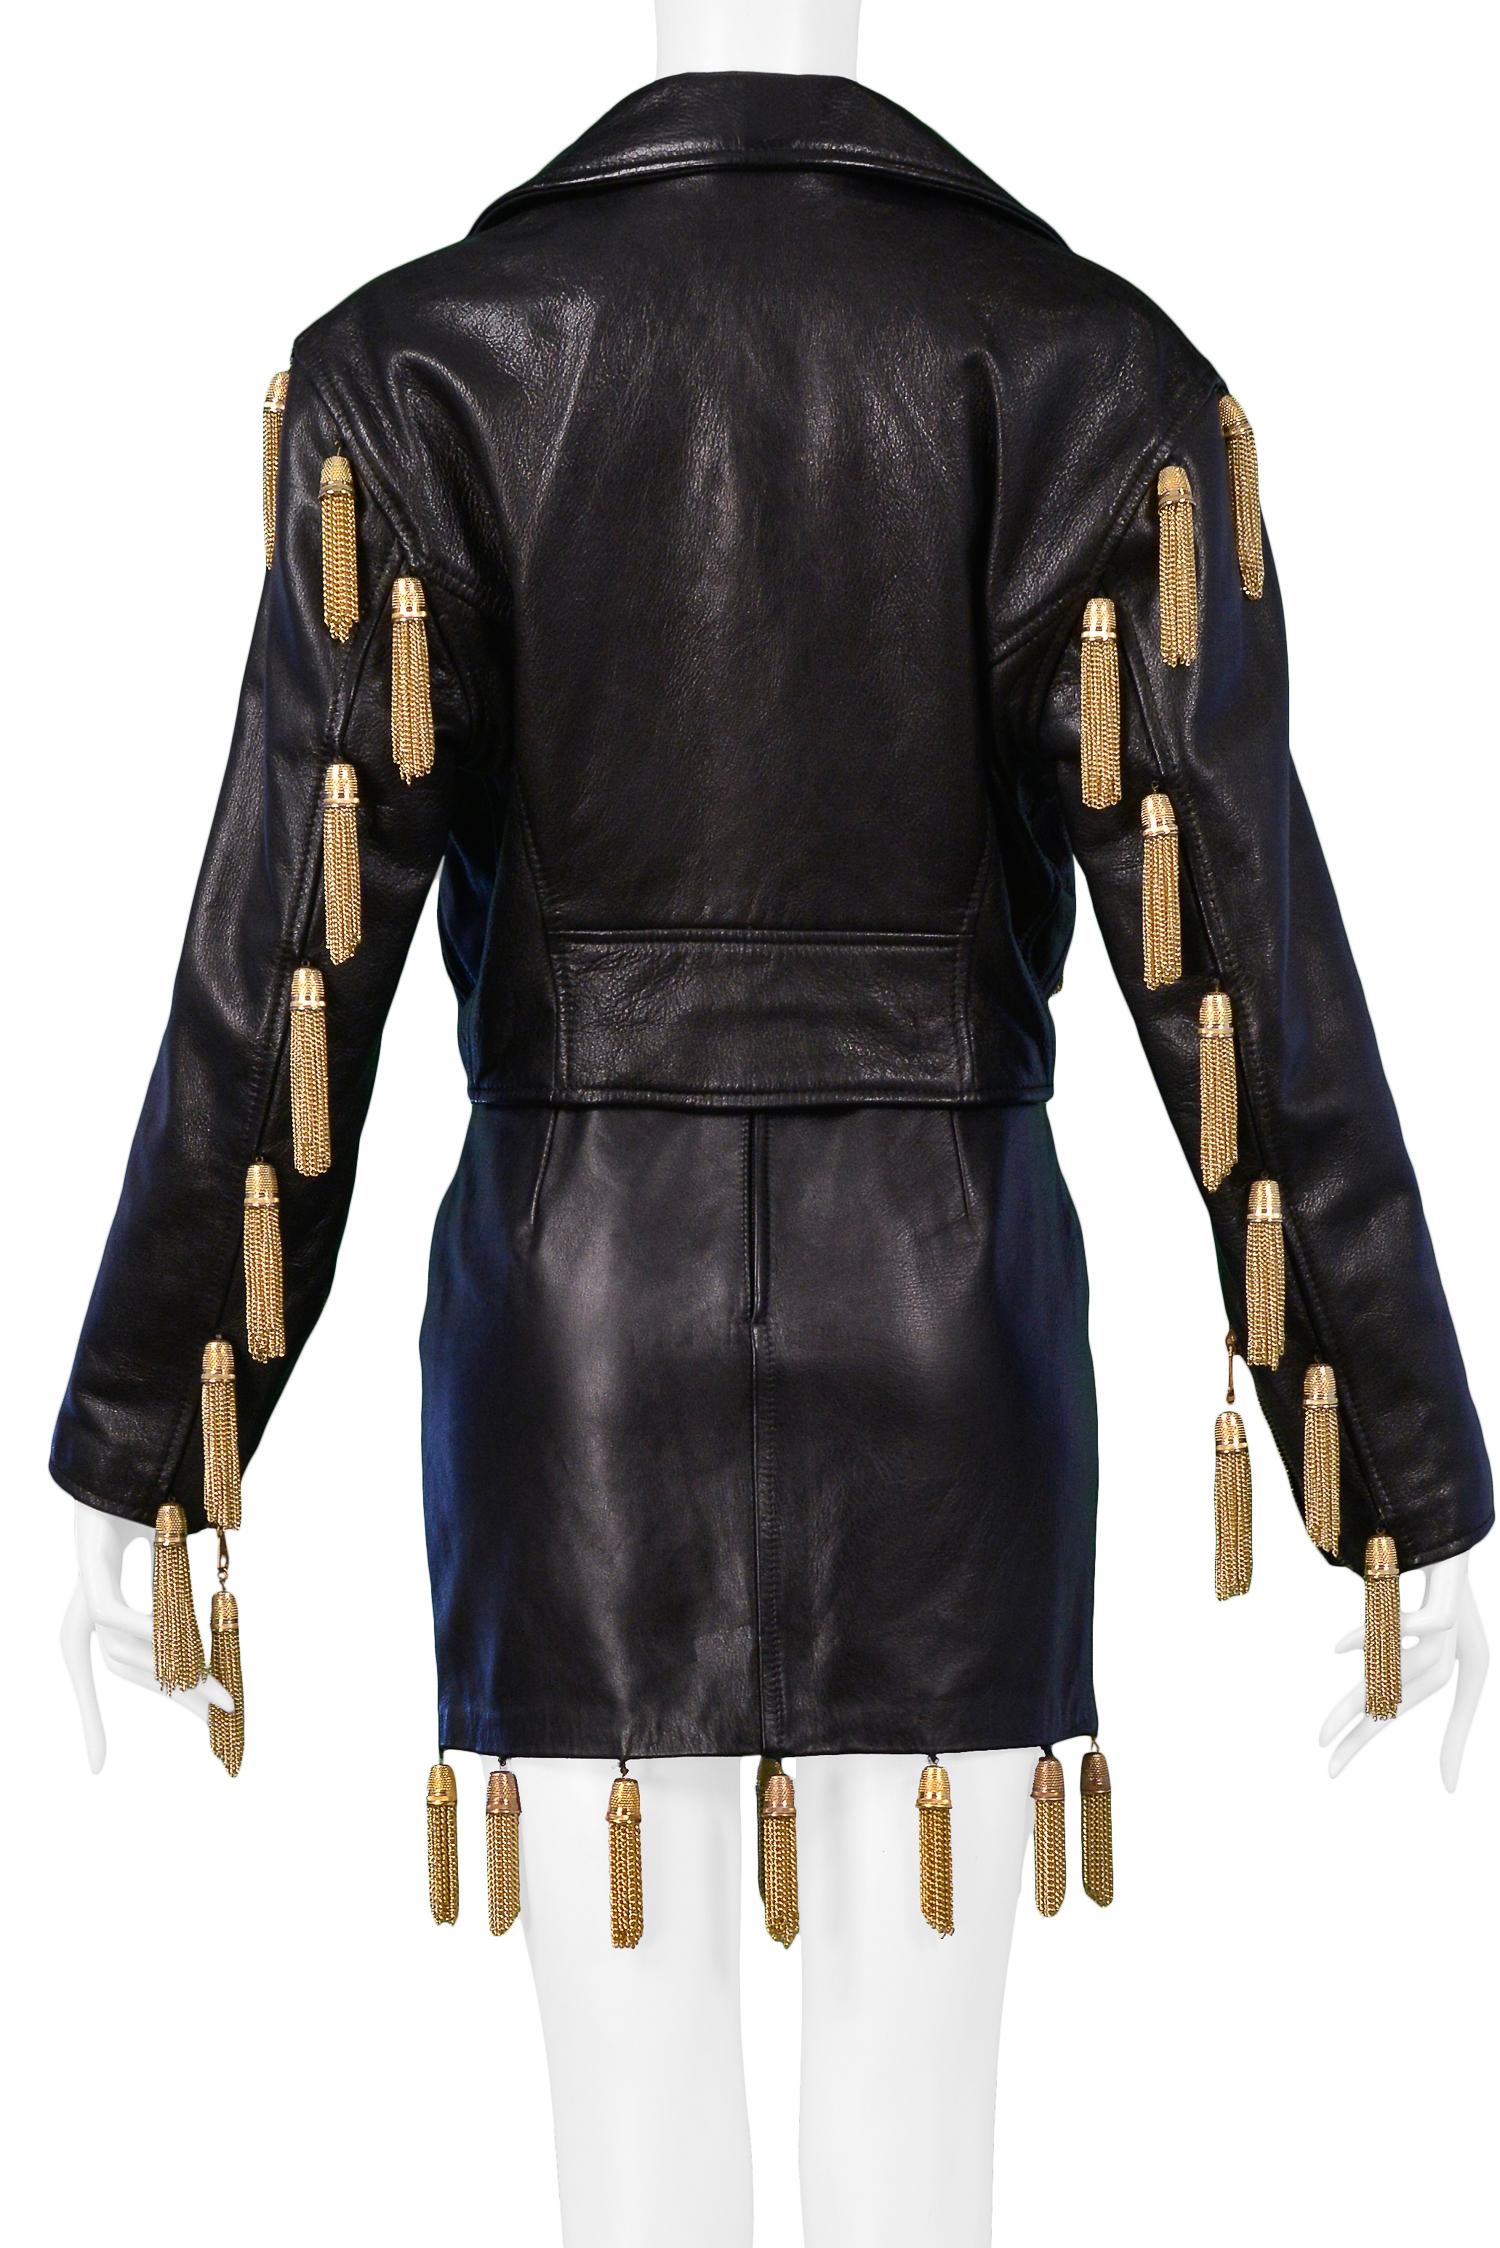 Vintage Moschino Black Leather Skirt Suit with Gold Chain Tassels 1989 In Good Condition For Sale In Los Angeles, CA